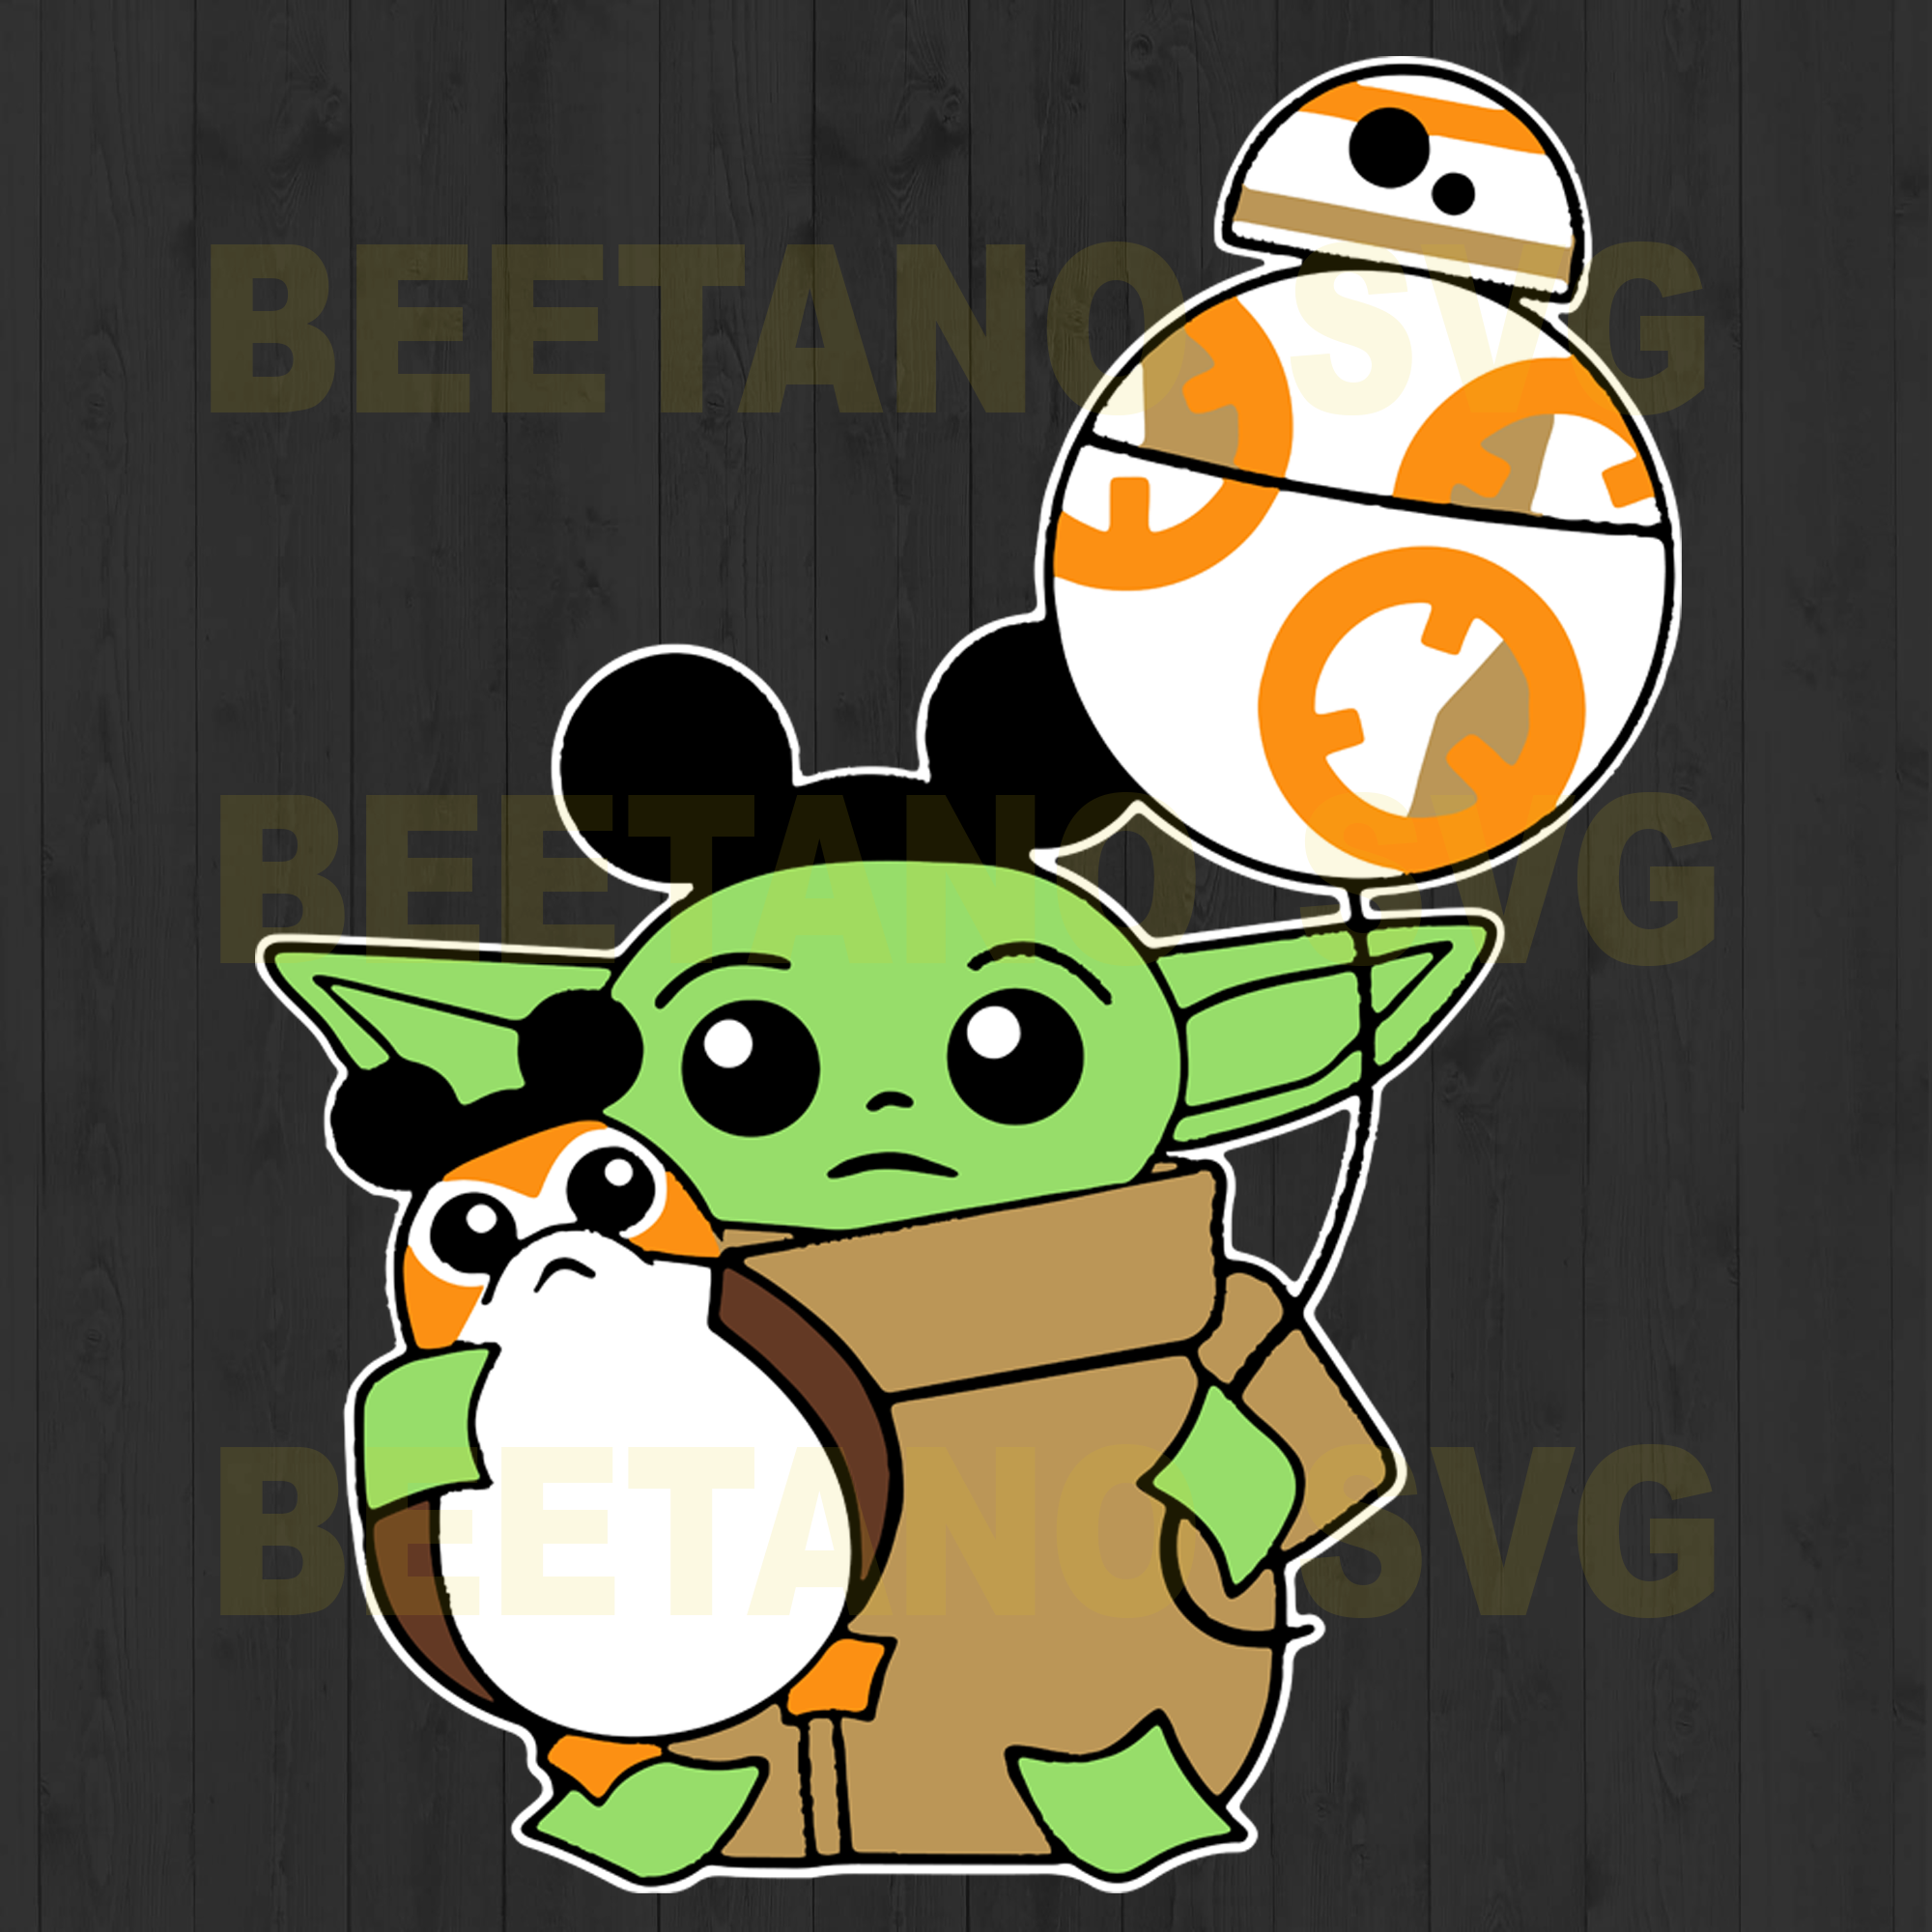 Download Baby Yoda Star War High Quality Svg Cut Files Best For Unique Craft Beetanosvg Scalable Vector Graphics